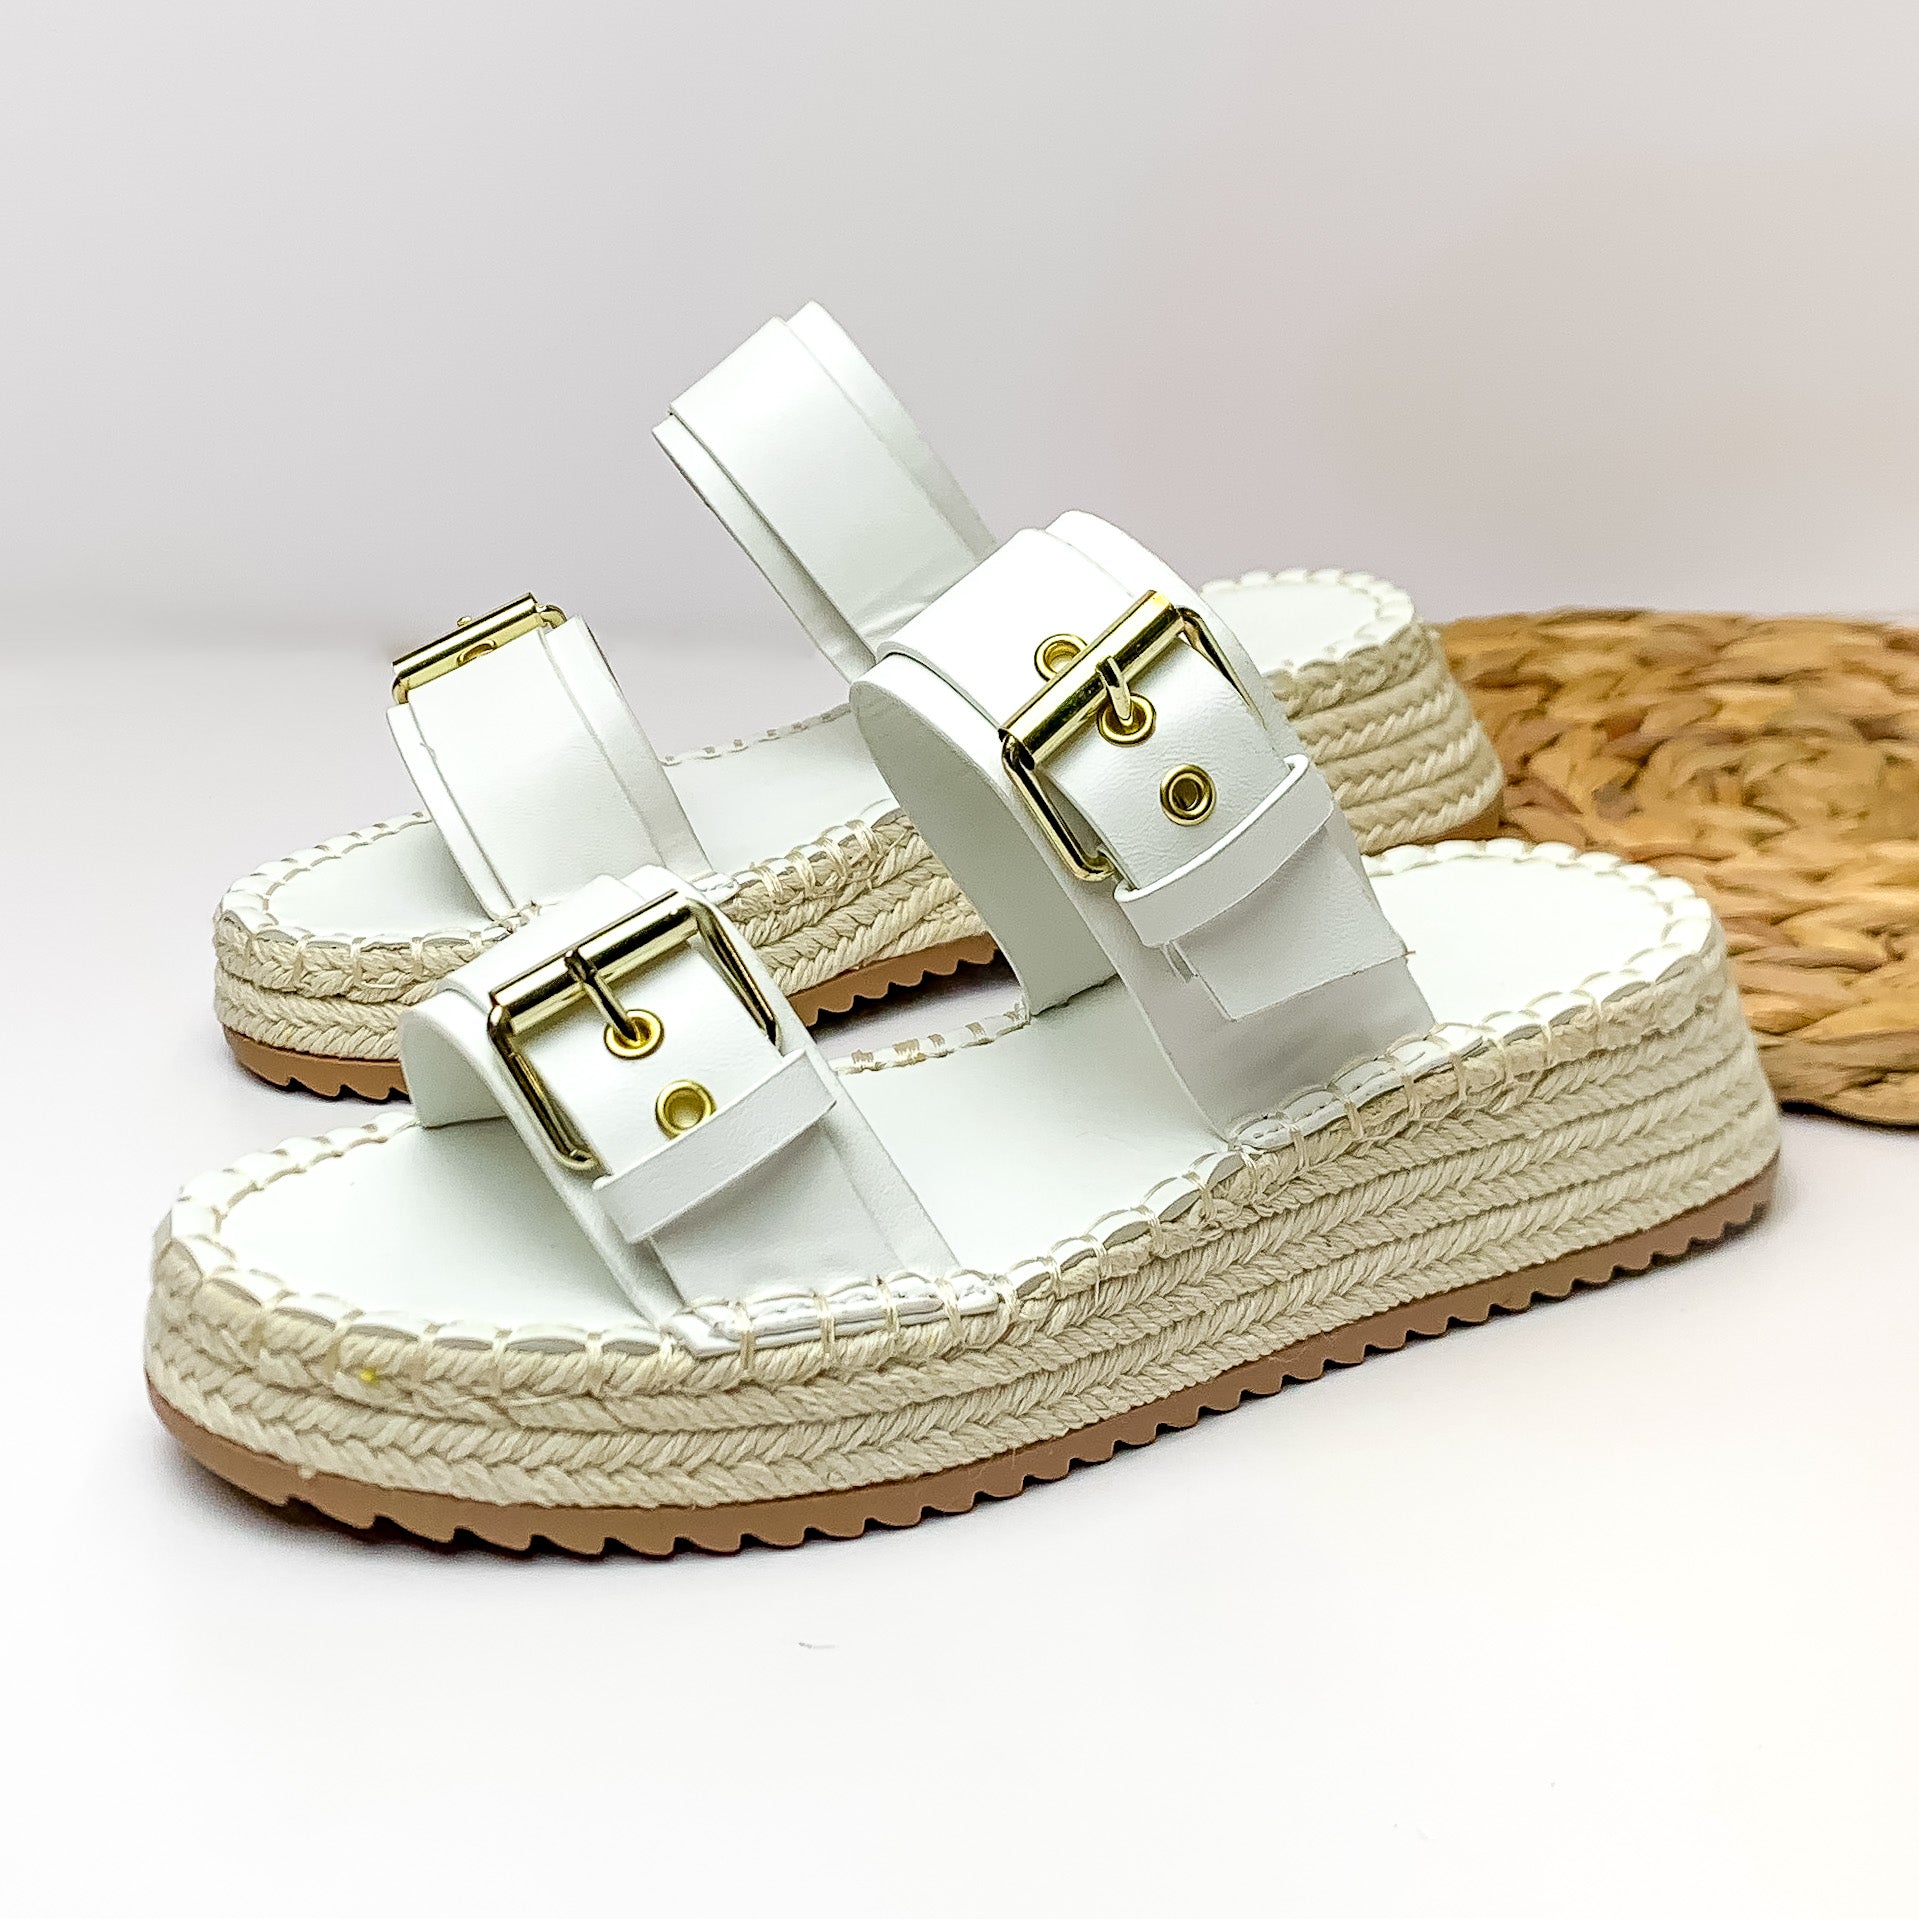 Yacht Trip Two Strap Slide On Espadrille Platform Sandals with Gold Buckles in White - Giddy Up Glamour Boutique